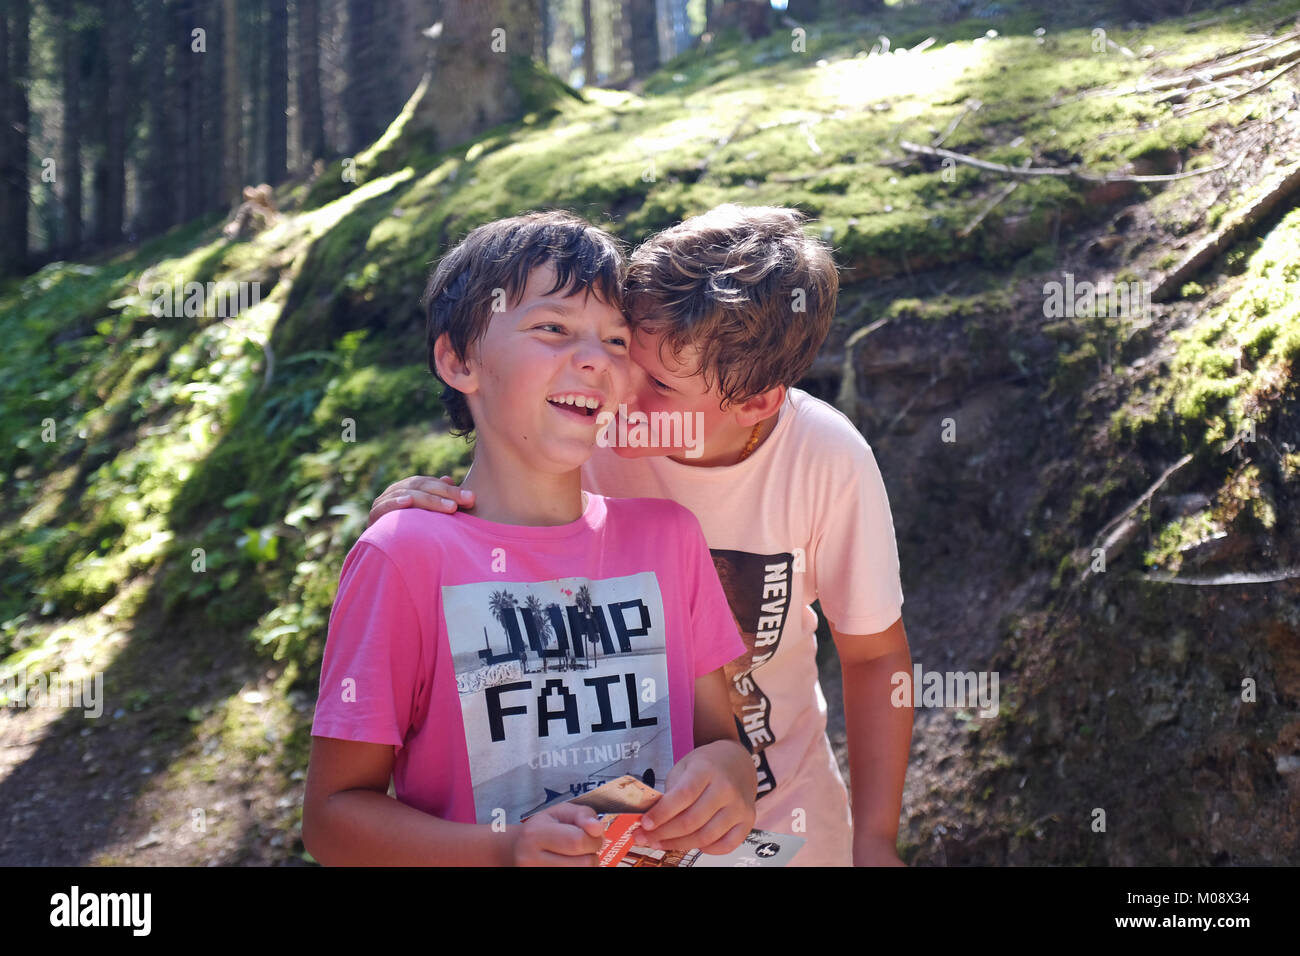 Two boys, brothers, walking and laughing as one of them tells a secret with his hand on a shoulder of the other in a forest. Stock Photo